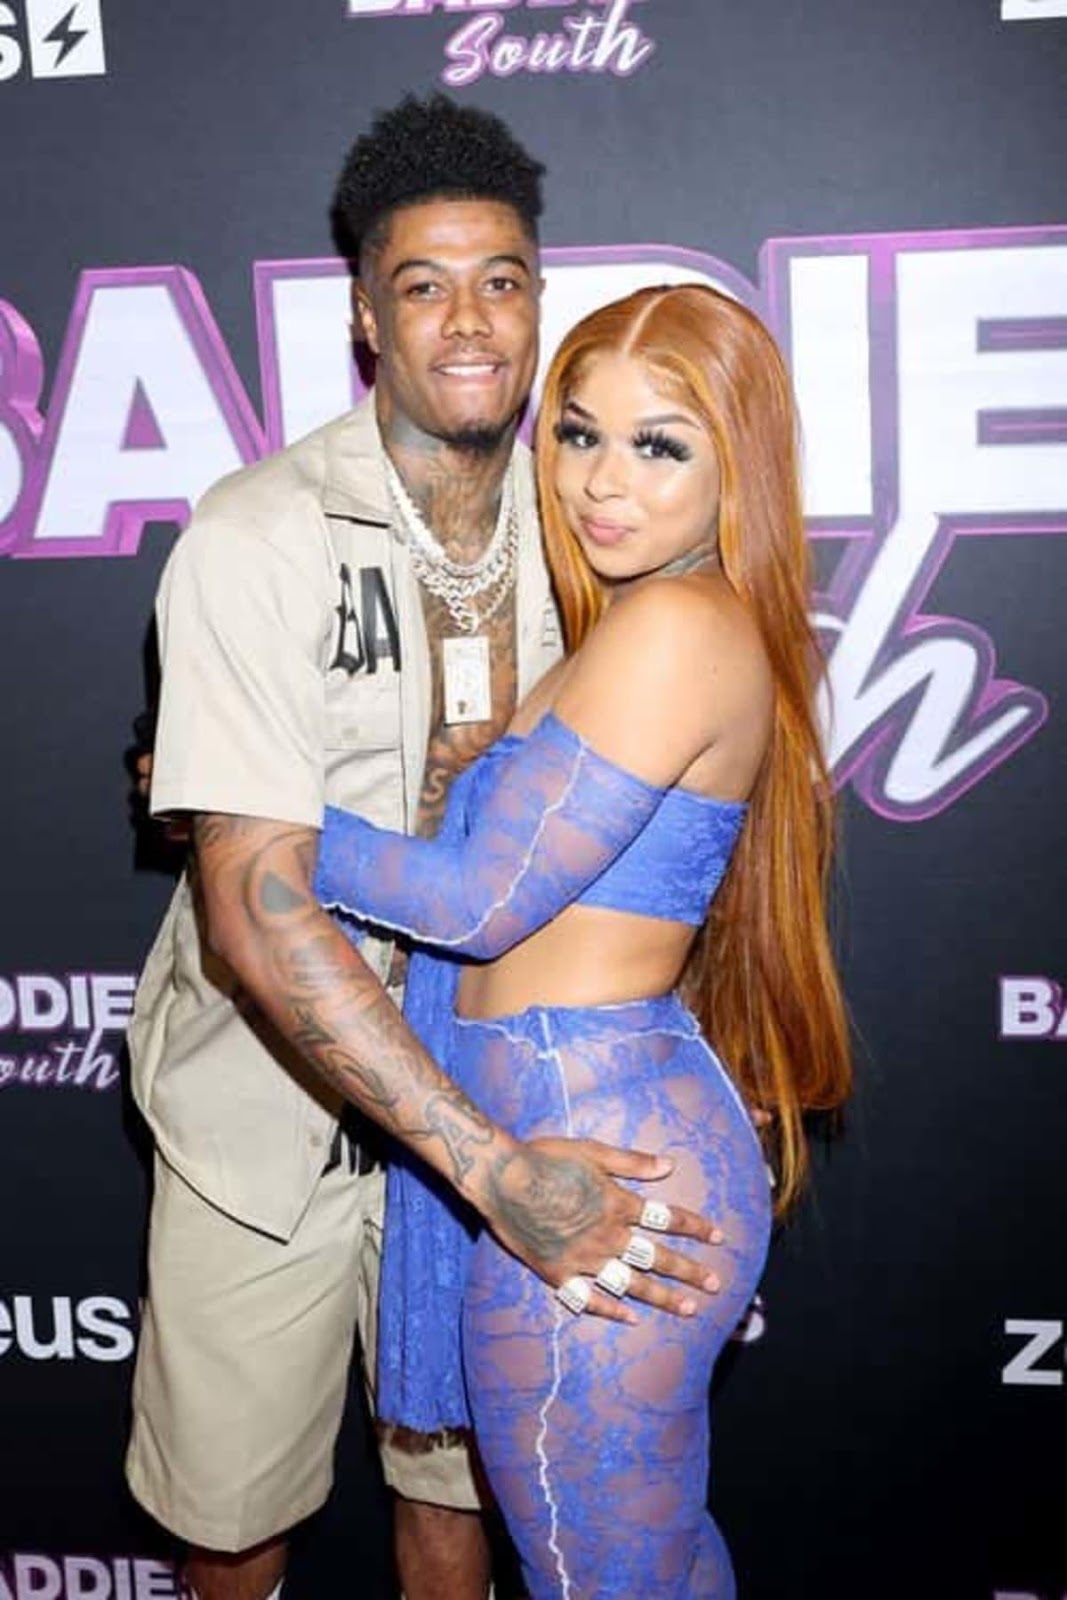 HOUSTON, TEXAS - JUNE 12: (L-R) chriseanroc and Blueface attend the ZEUS Network BADDIES SOUTH Houst